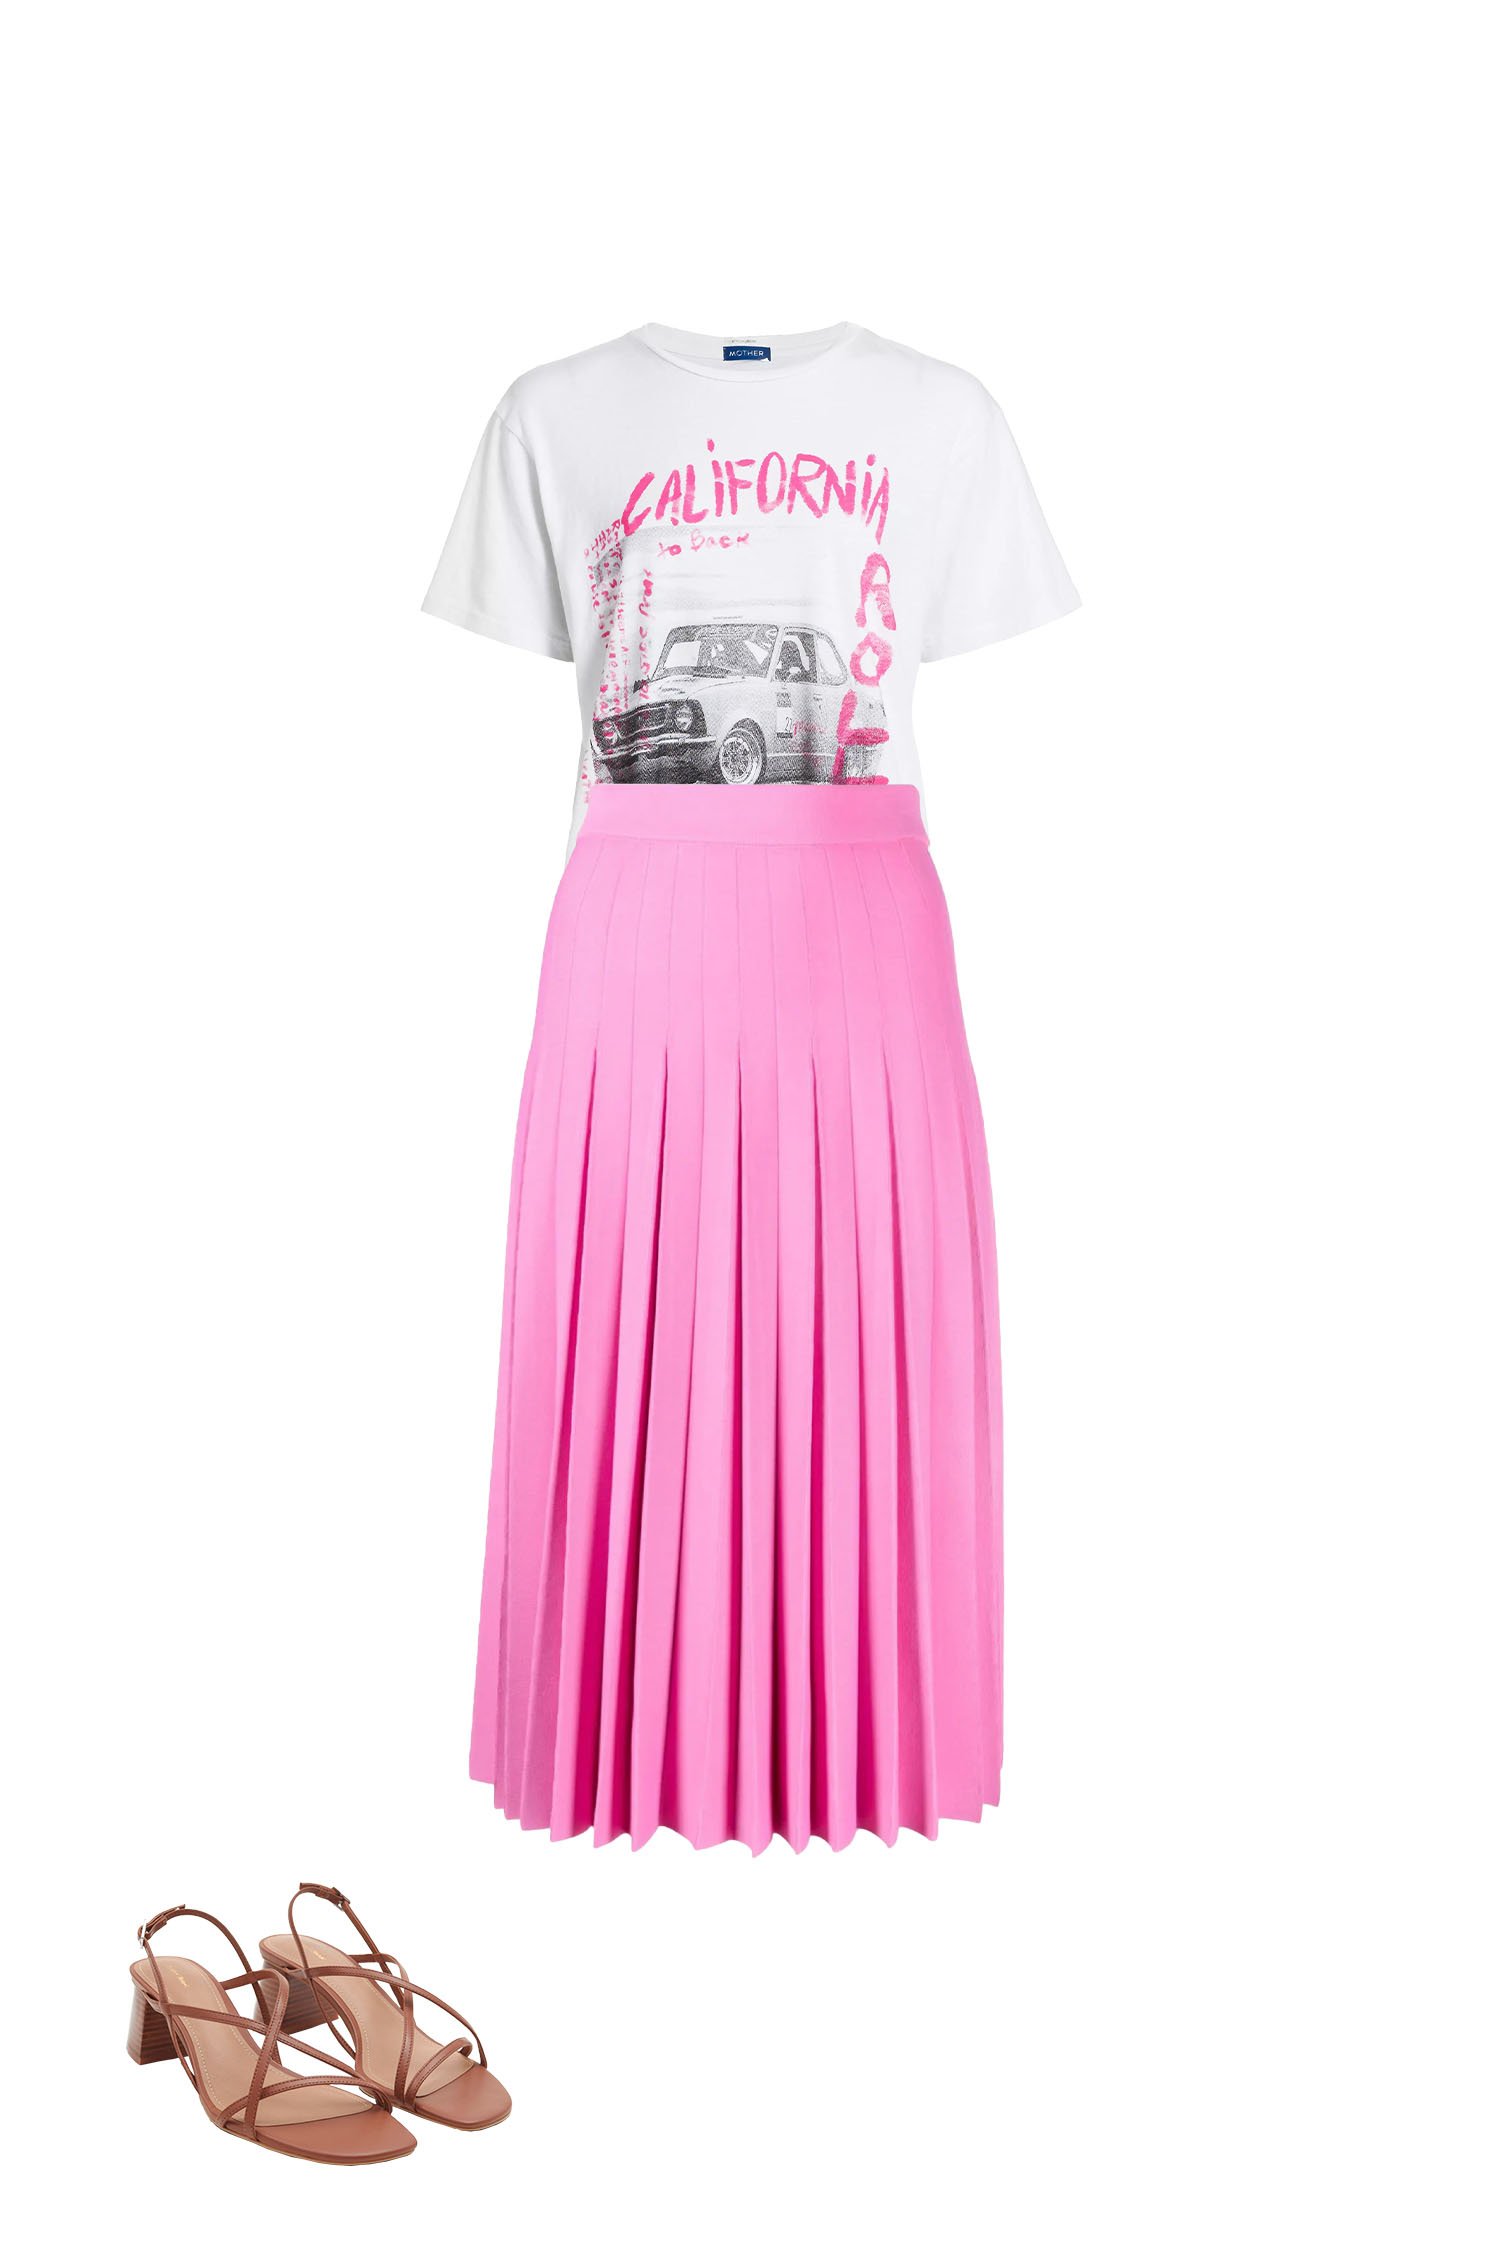 Bubblegum Pink Pleated Skirt and Graphic Print T-Shirt Outfit